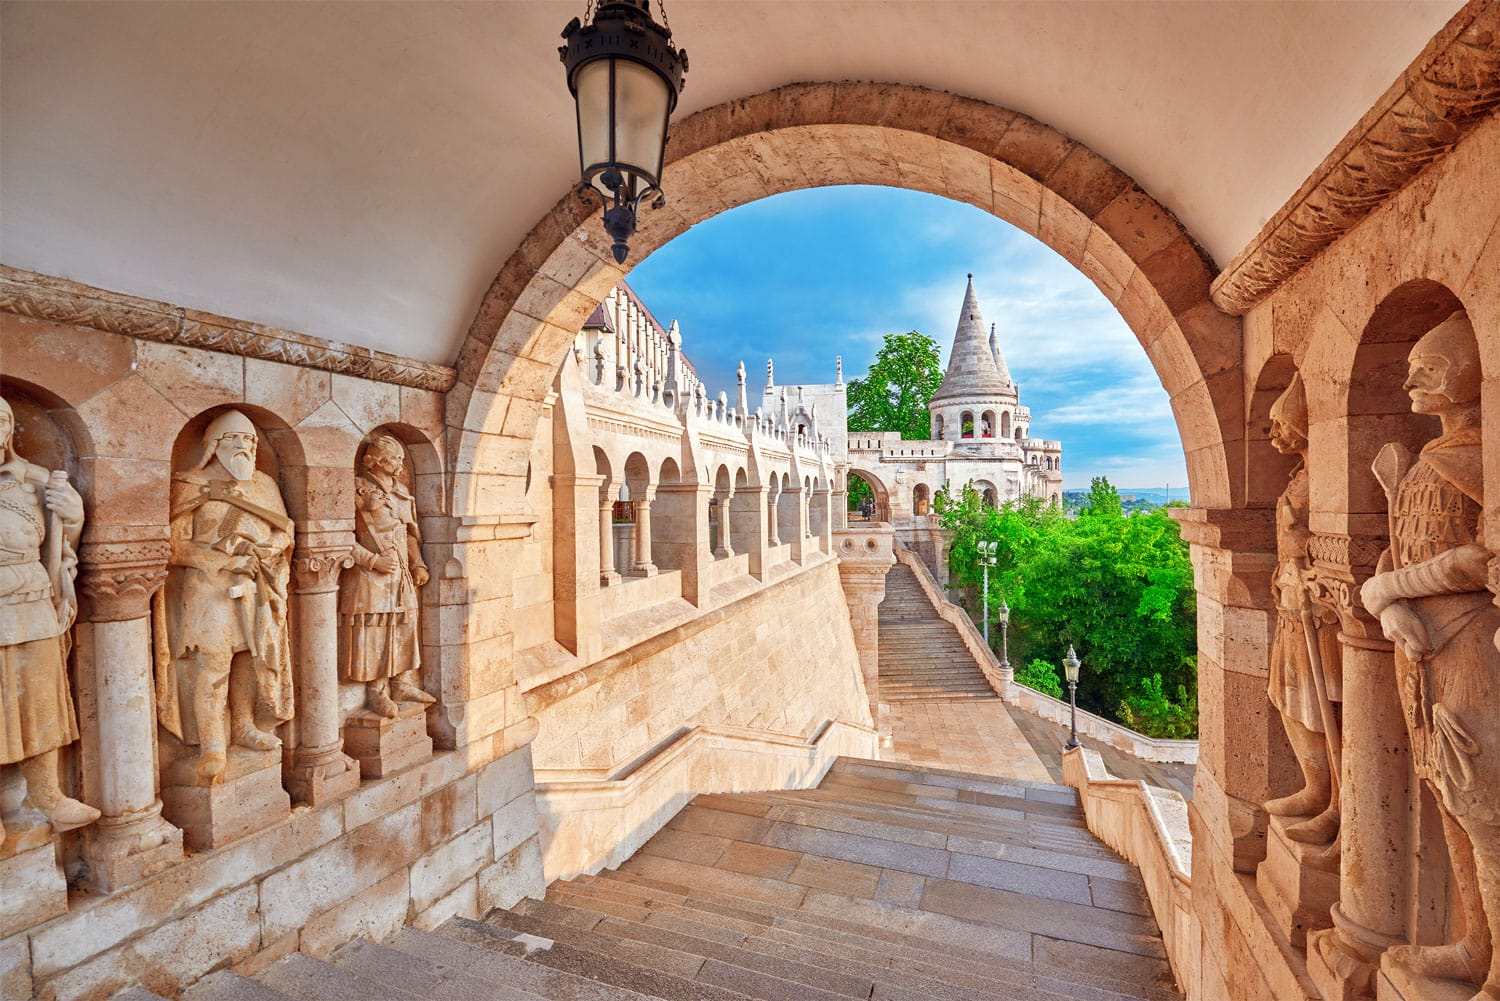 View on the Old Fisherman Bastion in Budapest. Arch Gallery.